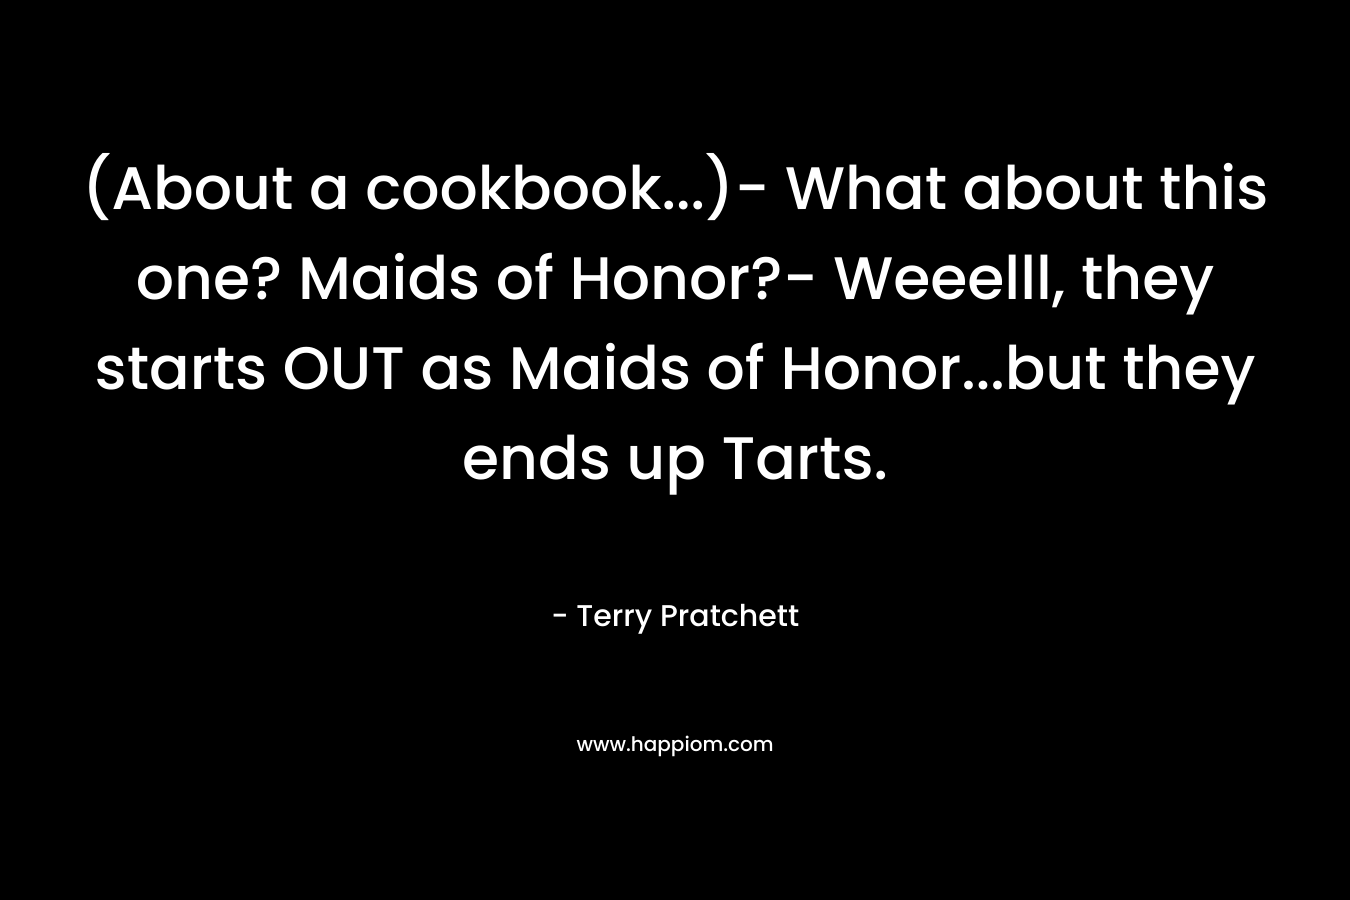 (About a cookbook...)- What about this one? Maids of Honor?- Weeelll, they starts OUT as Maids of Honor...but they ends up Tarts.